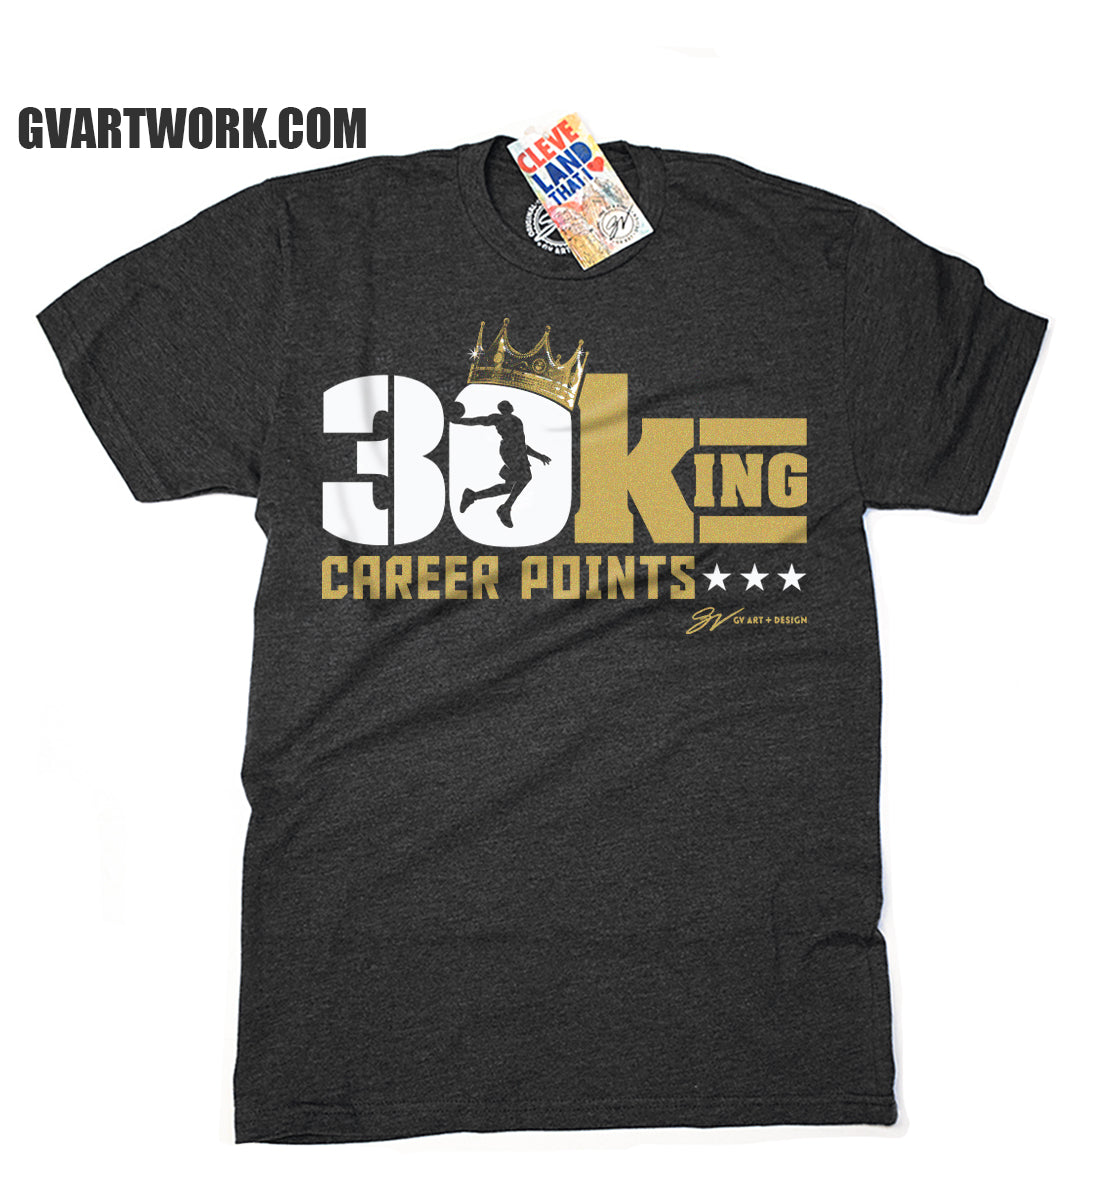 Limited Edition 30,000 Point Commemorative T shirt